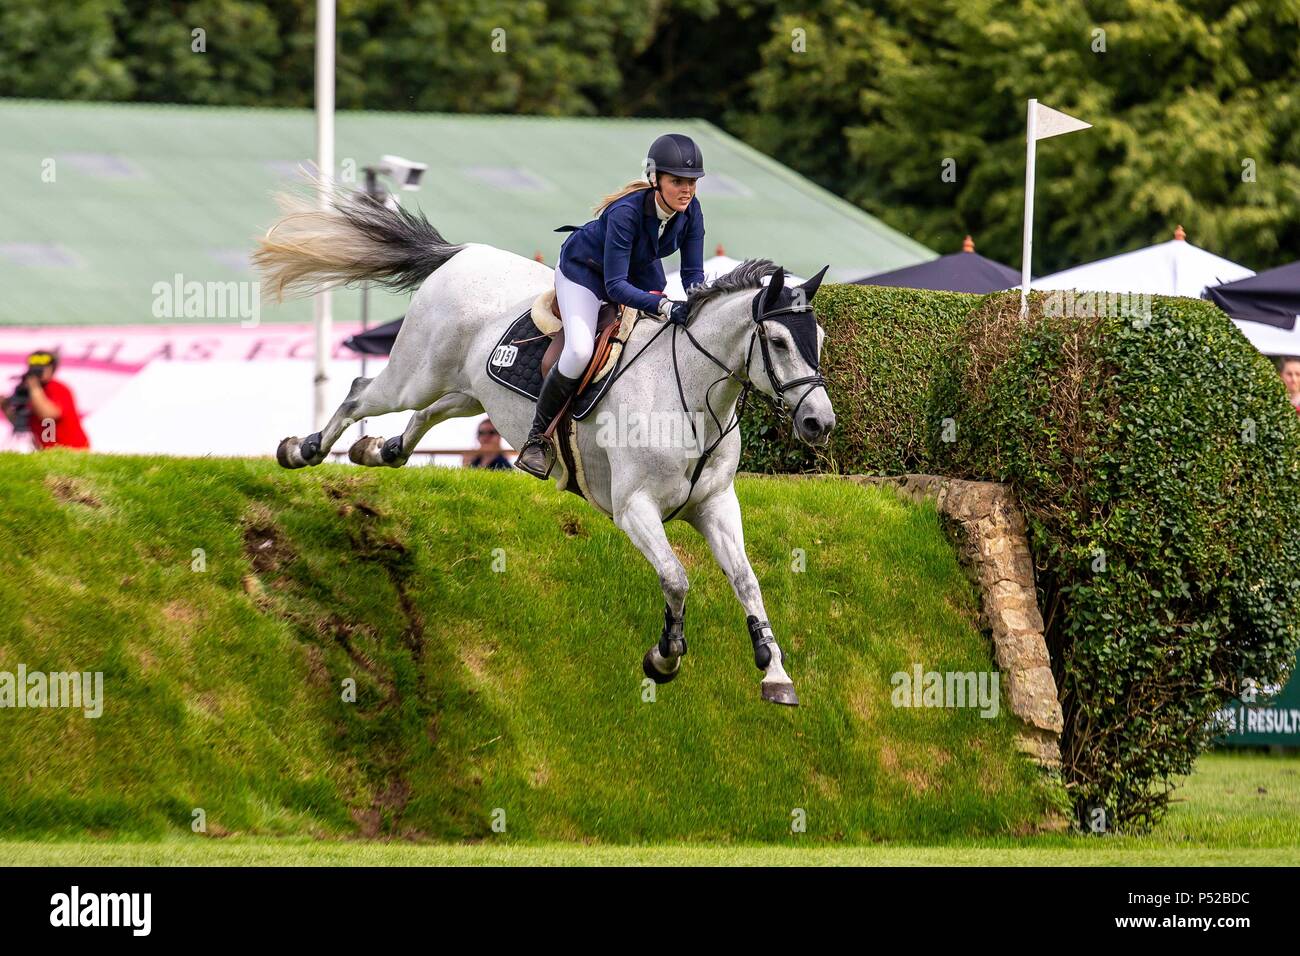 West Sussex, UK. 23rd June, 2018. Charlene Bastone riding Fyberlinus.  GBR.The British Speed Derby. CSI4* The Al Shira'aa Hickstead Derby Meeting.  Showjumping. The All England Jumping Course. Hickstead. West Sussex. UK. Day